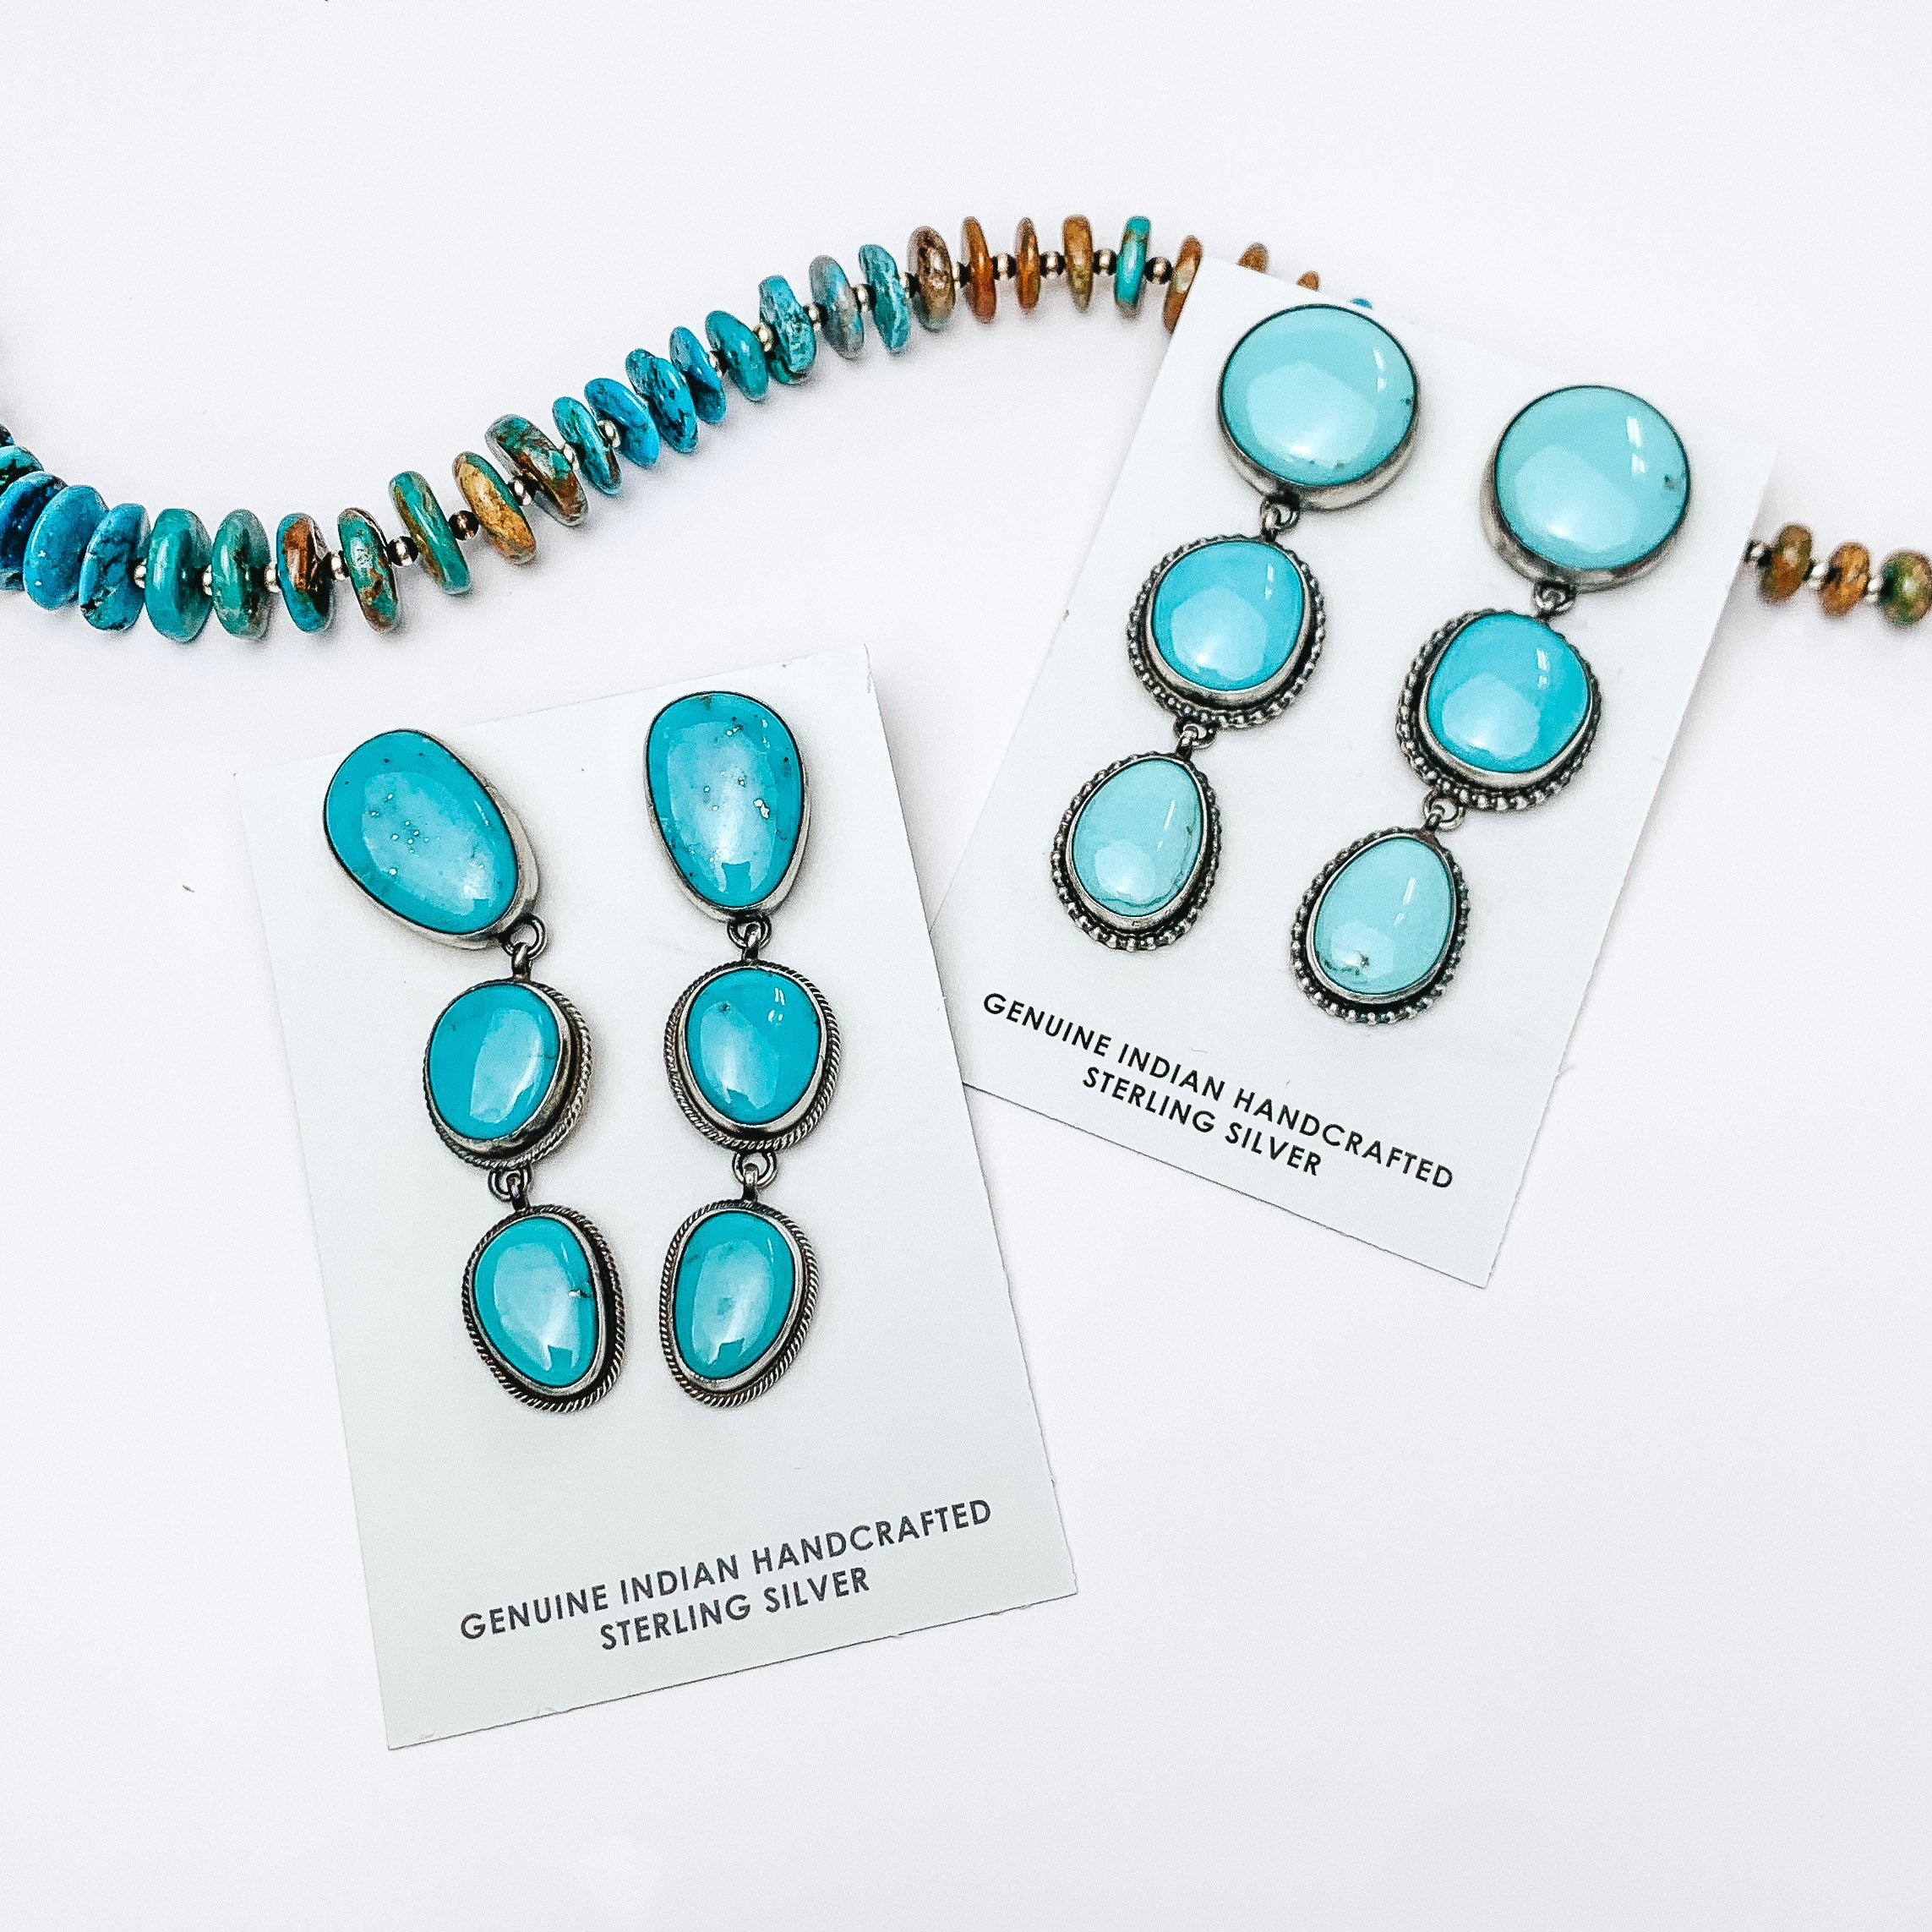 To the left of the picture is stud drop earrings with three turquoise stones. A similar pair is to the right. Above them is a turquoise necklace, all on a white background. 